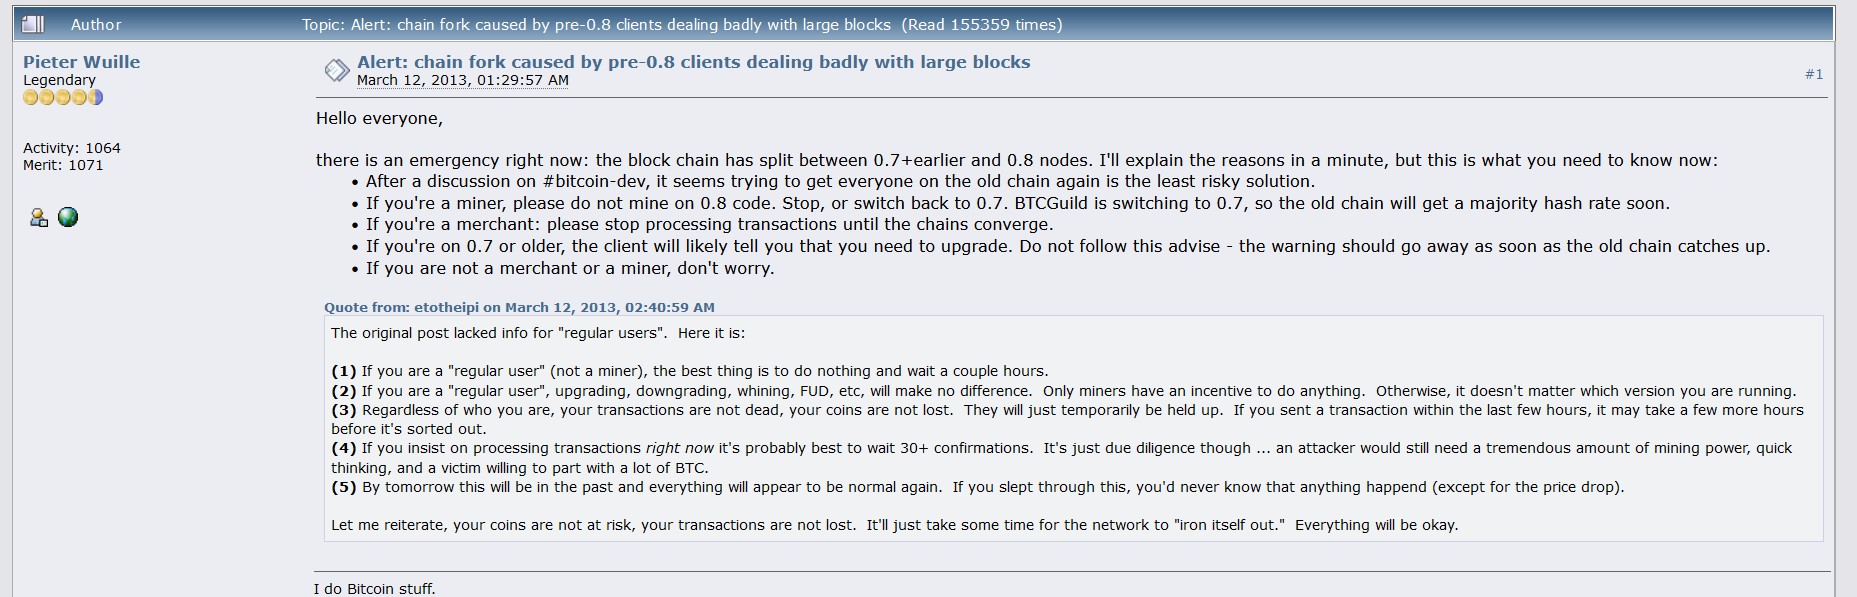 Bitcoin Core Dev Pieter Wuille Initiating The Bitcoins "Can You Guys Stop Trading?" Moment - Bitcointalk 